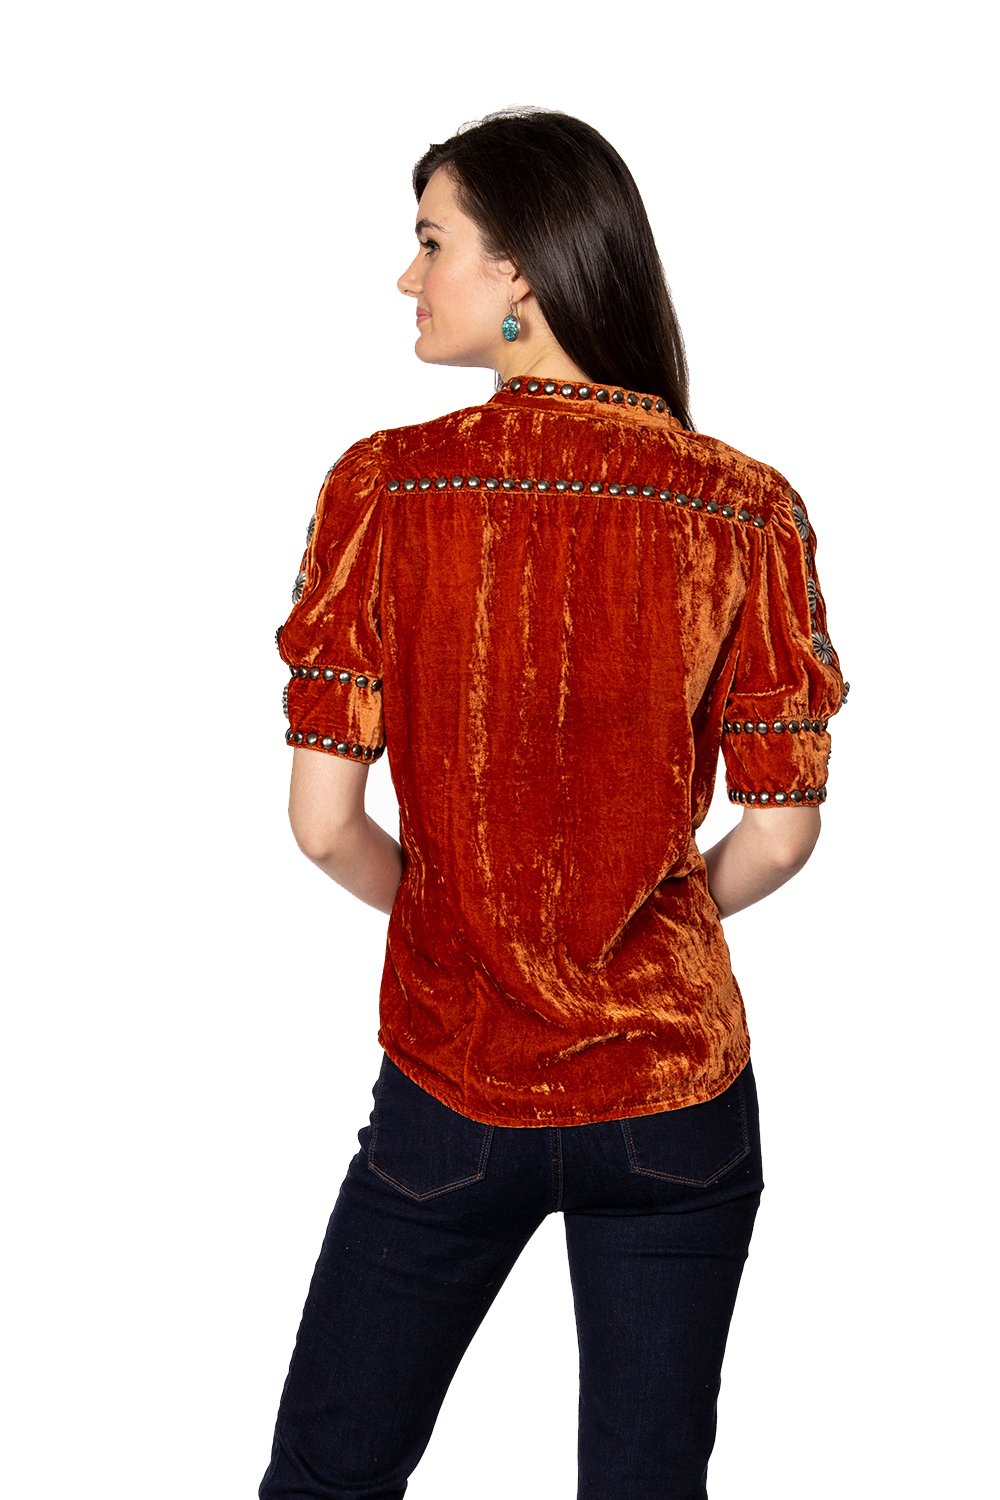 Double D Ranch Velvet Blackhills Top in Shasta 6Whiskey Cody Fall Collection 2020 T3336